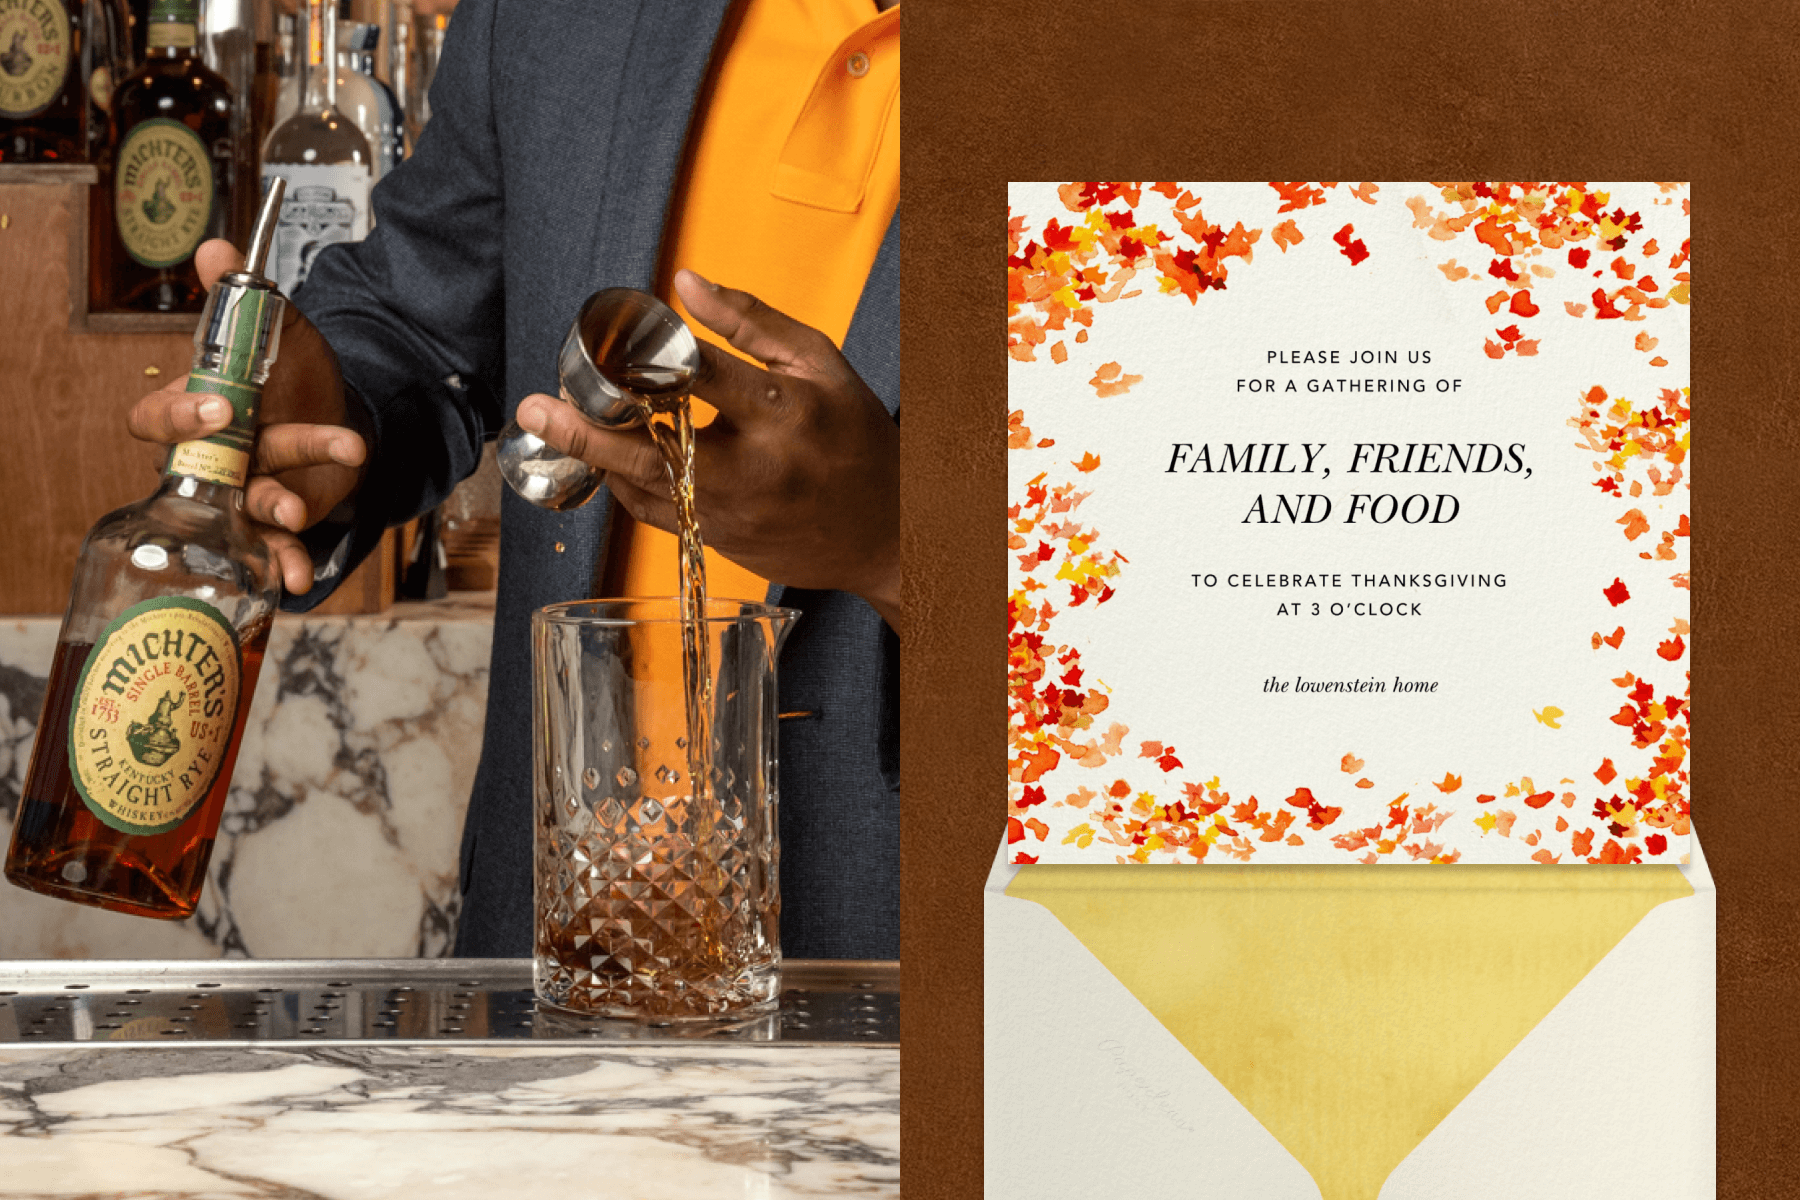 Left: In a bar, a person’s hands hold a bottle of Ryewhile pouring a jigger of Rye into a mixing vessel. Right: A Thanksgiving invitation reads “FRIENDs, FAMILY, AND FOOD” with a border of small autumn leaves. 